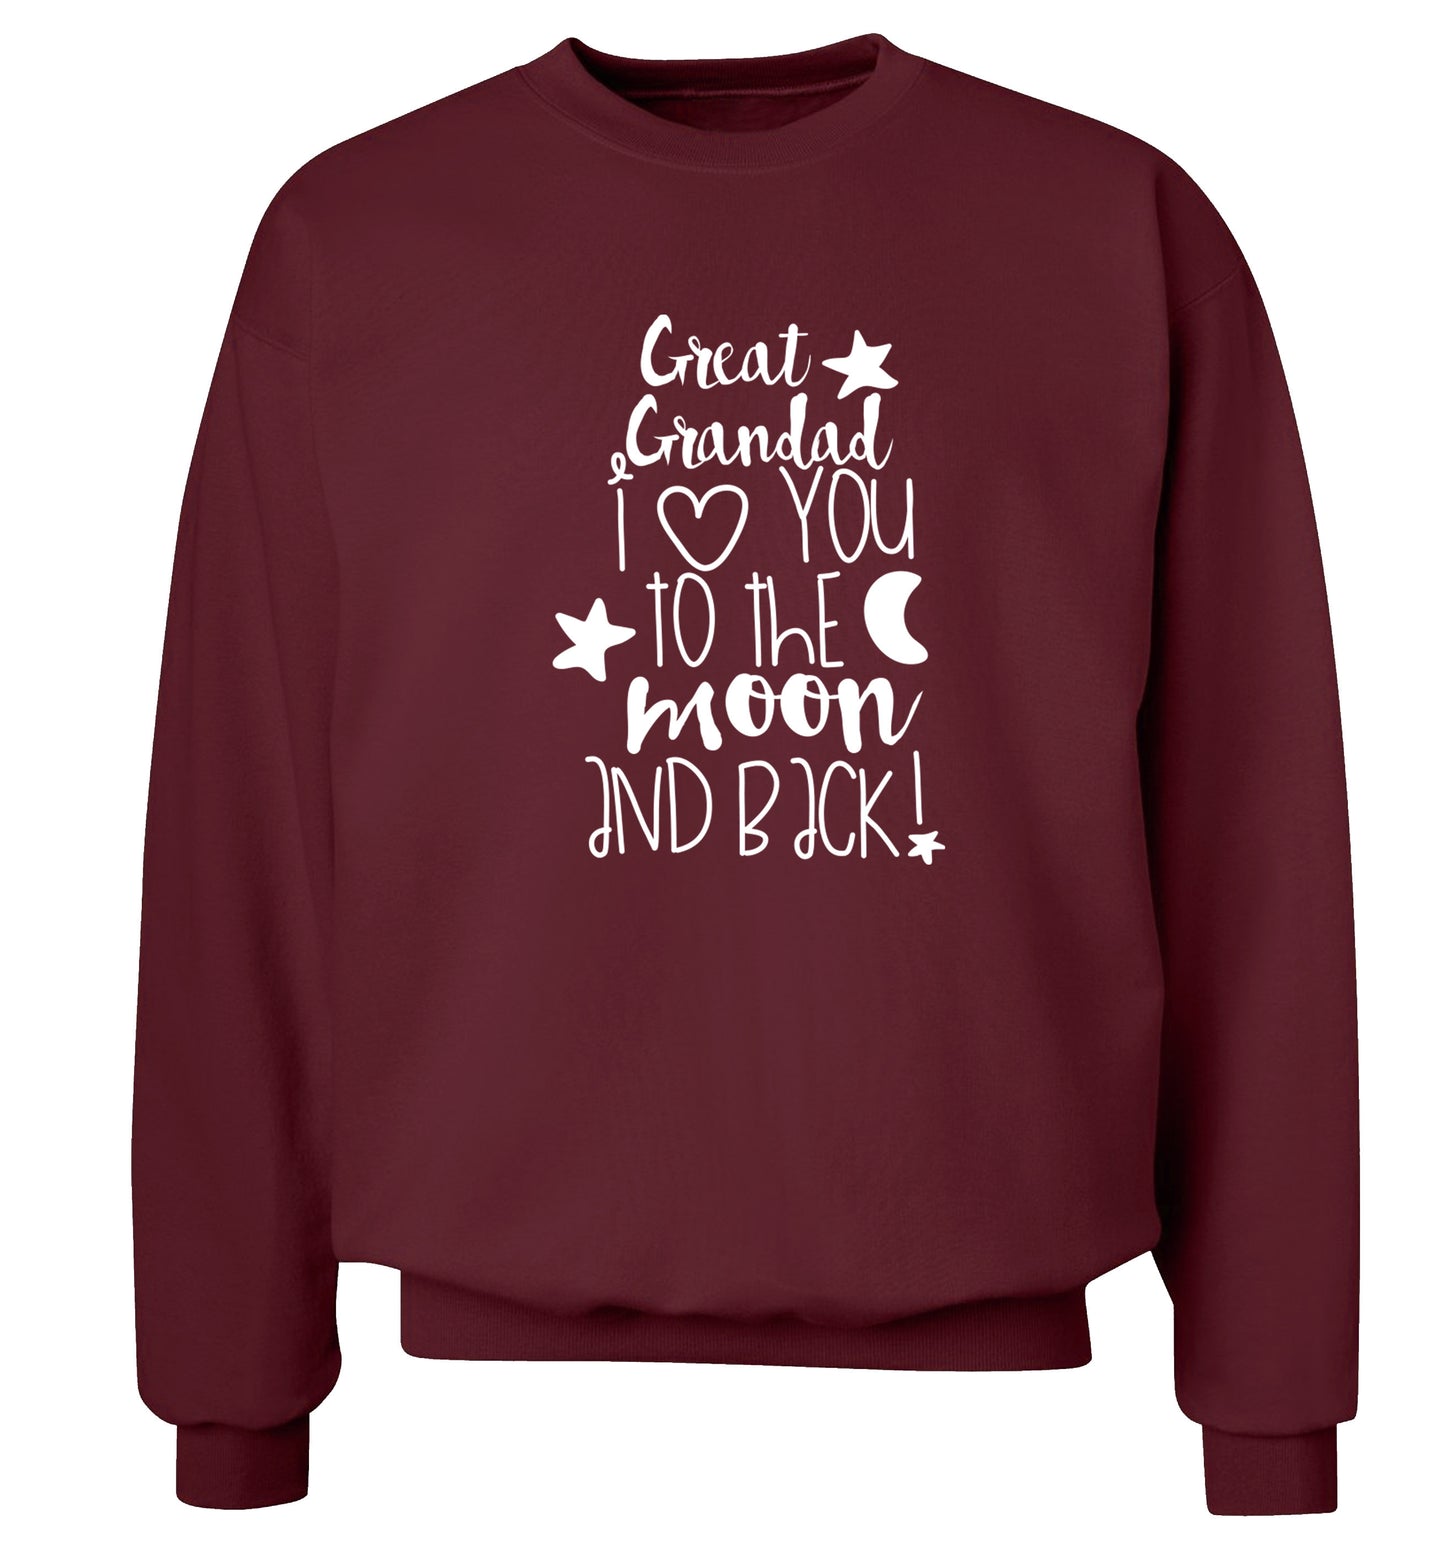 Great Grandad I love you to the moon and back Adult's unisex maroon  sweater 2XL